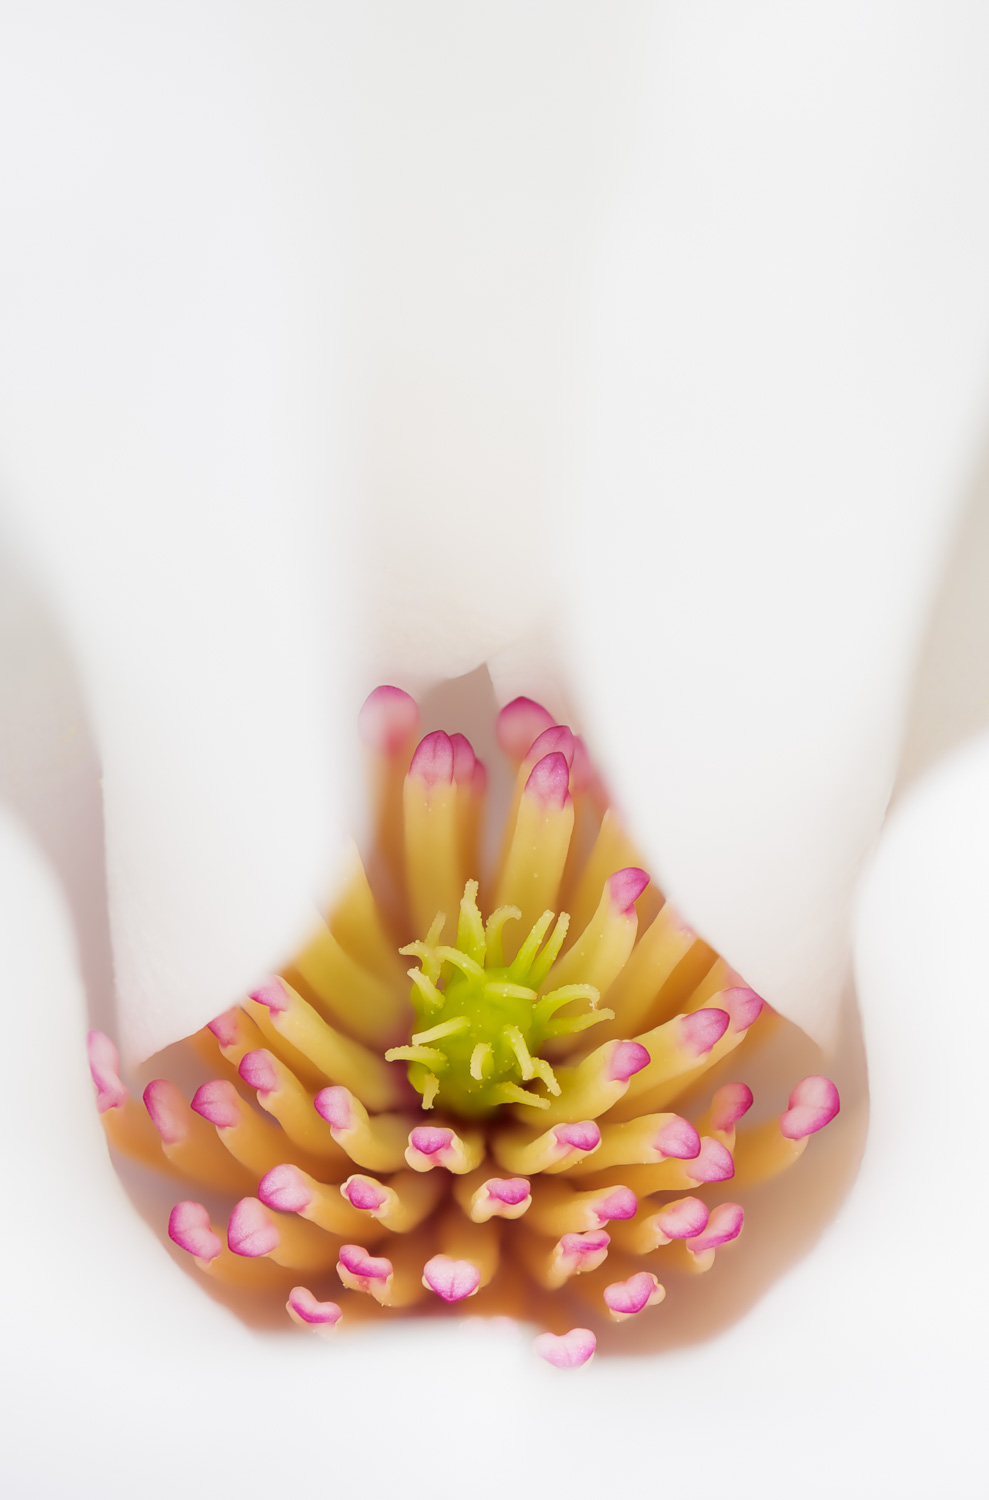 A look inside a magnolia blossom (Magnolia salicifolia) as it begins to unfurl in Spring; also known as the Willow-leafed or...